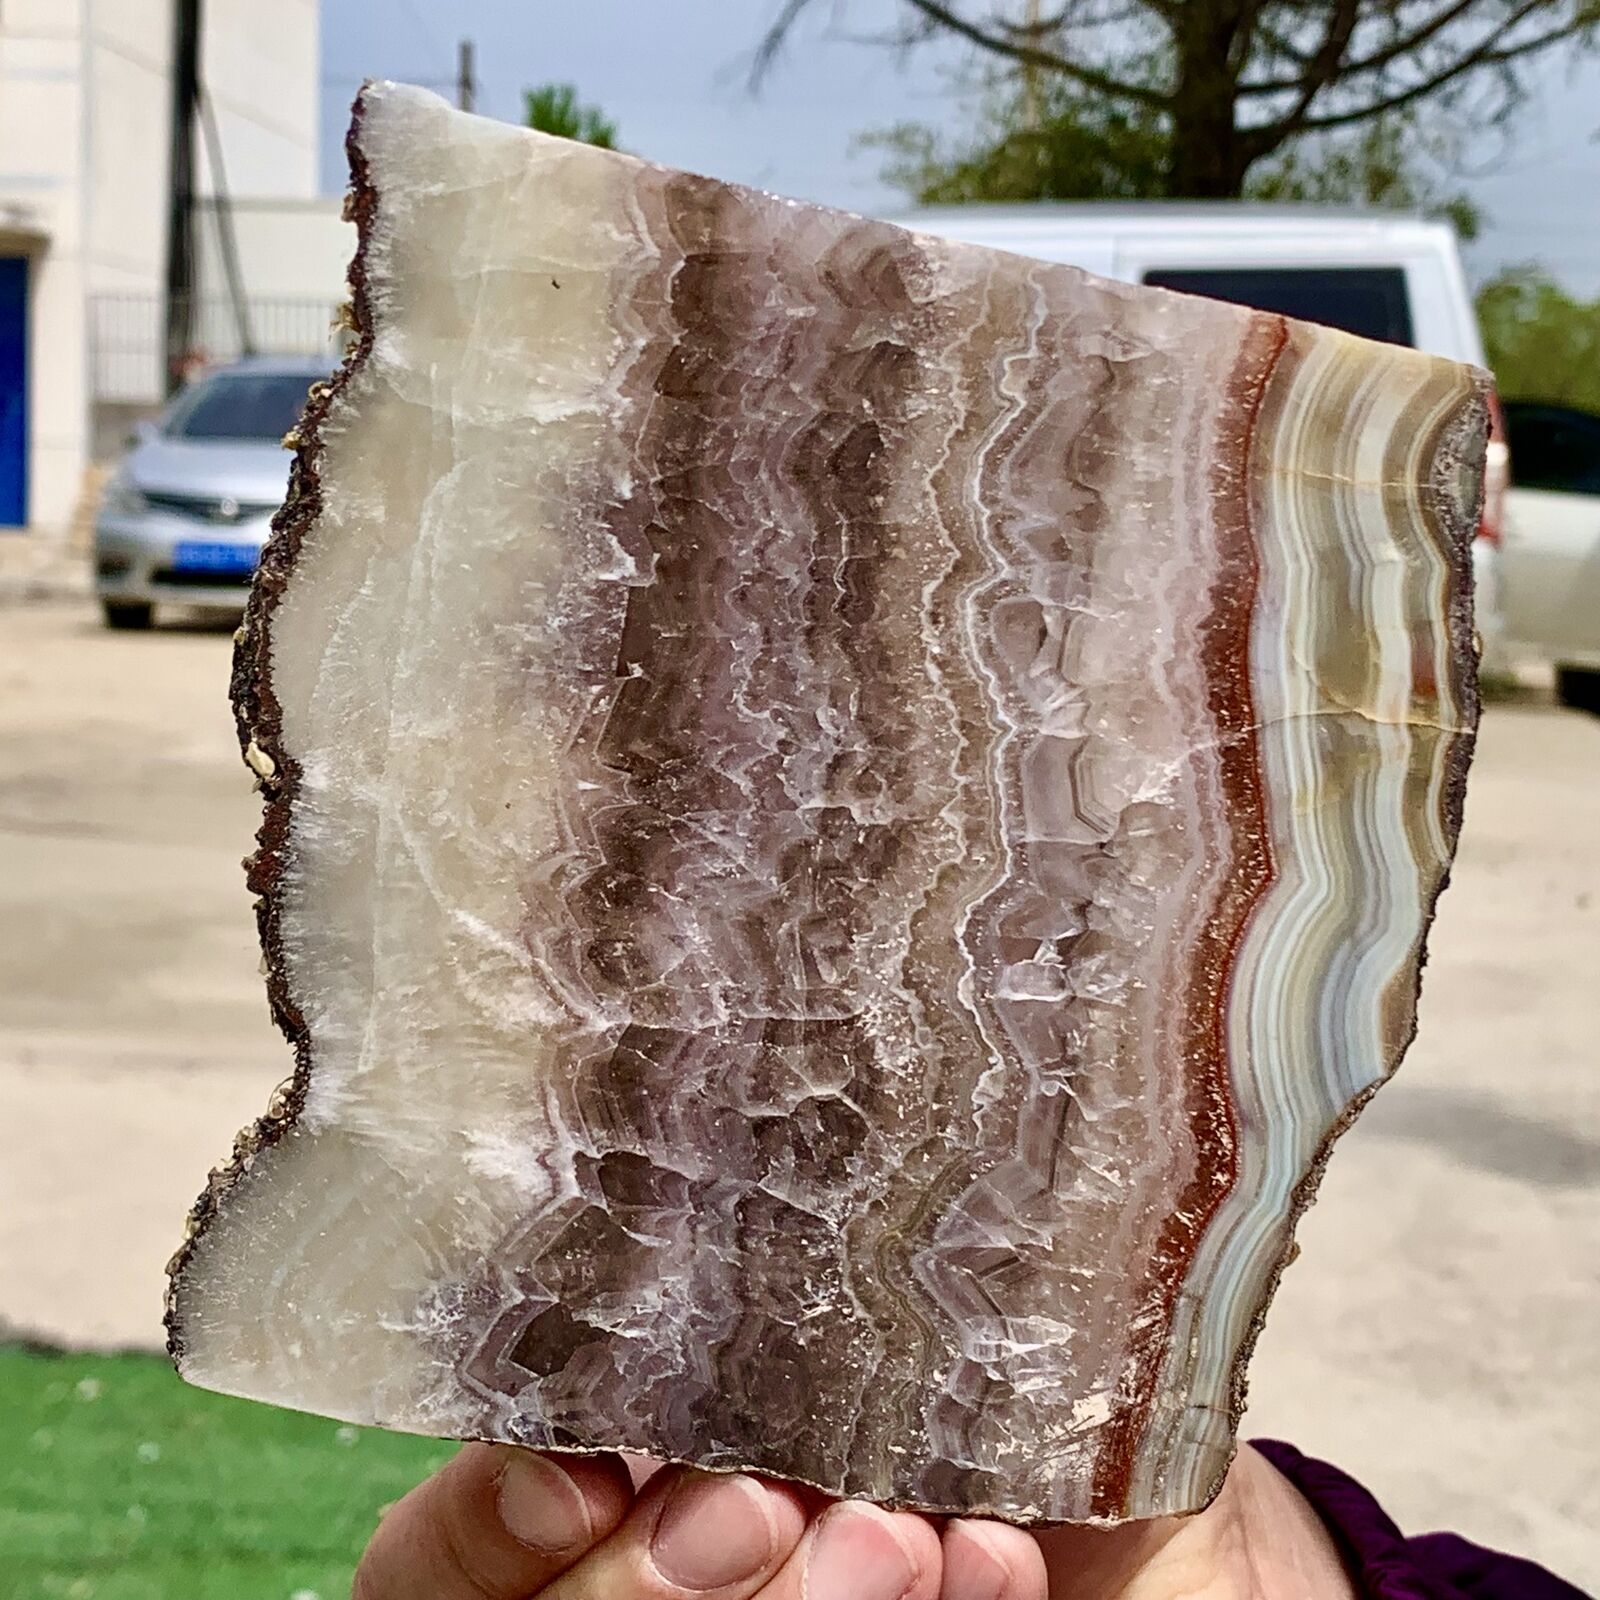 431G Natural and beautiful dreamy amethyst rough stone specimen